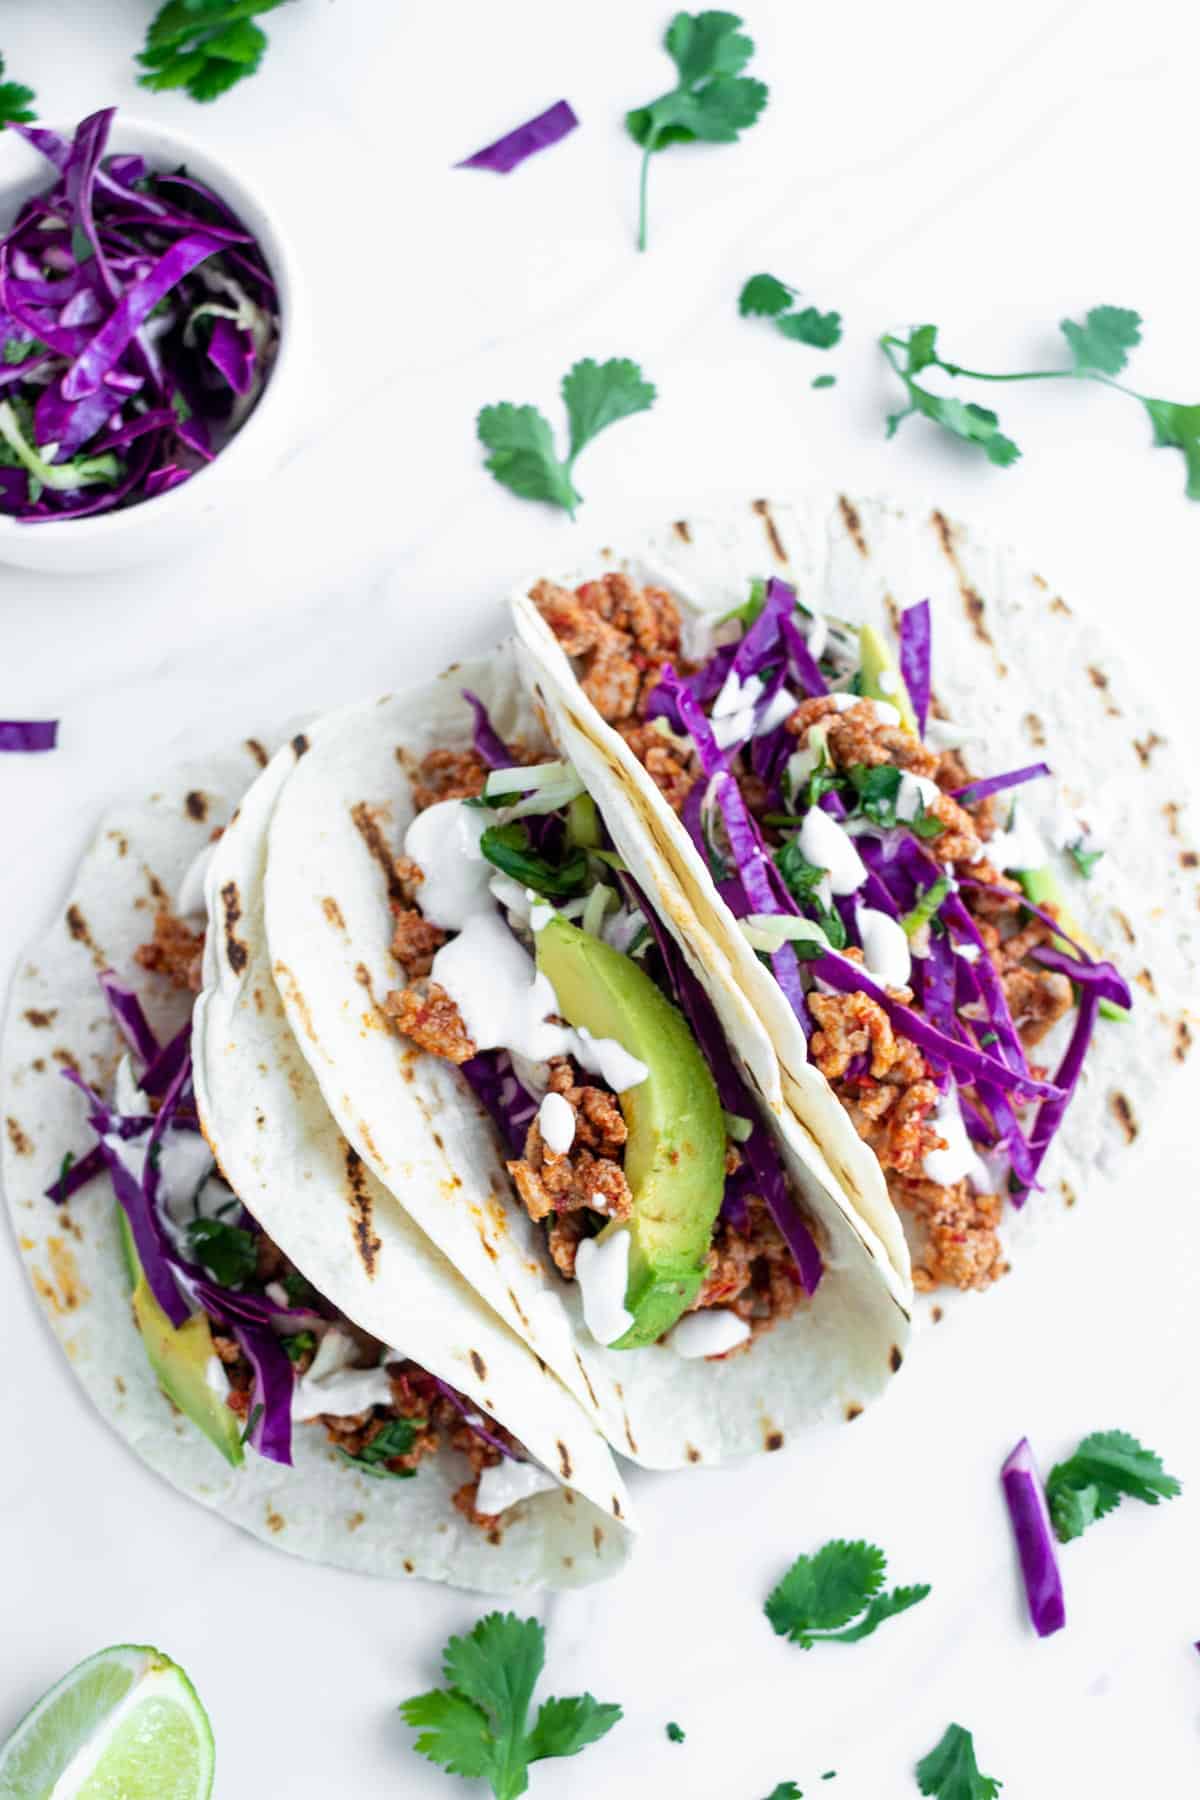 3 spicy ground pork tacos with purple cabbage slaw